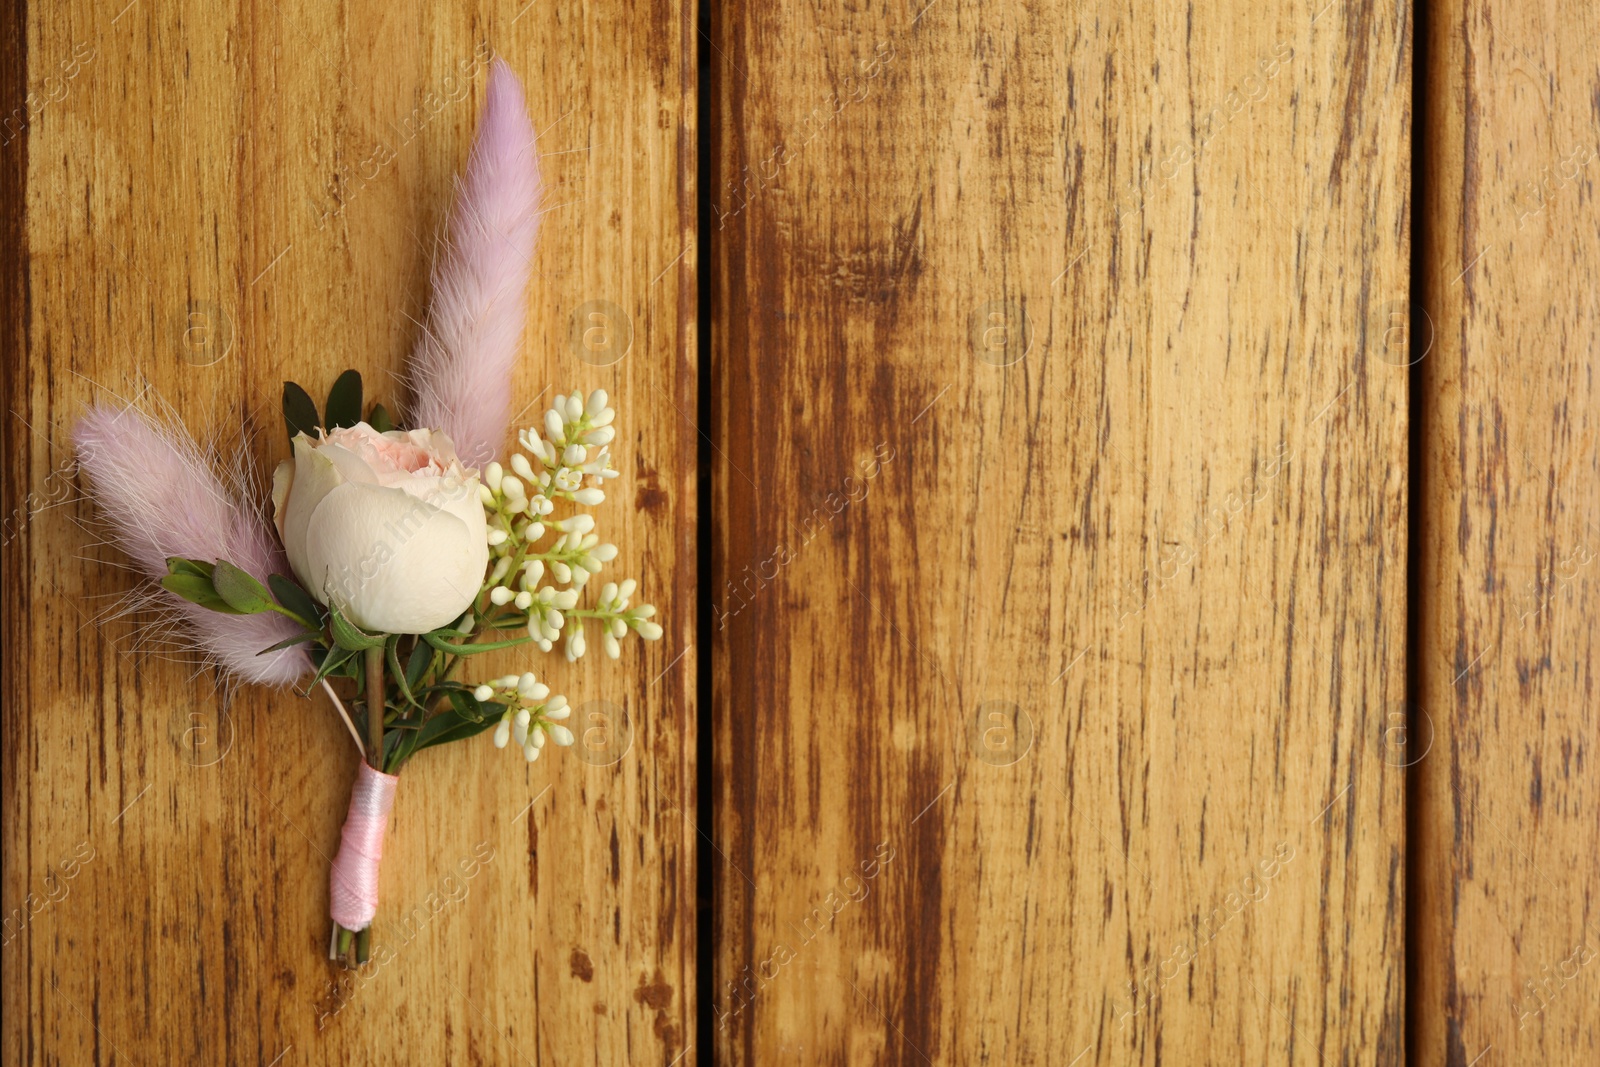 Photo of Small stylish boutonniere on wooden table, top view. Space for text